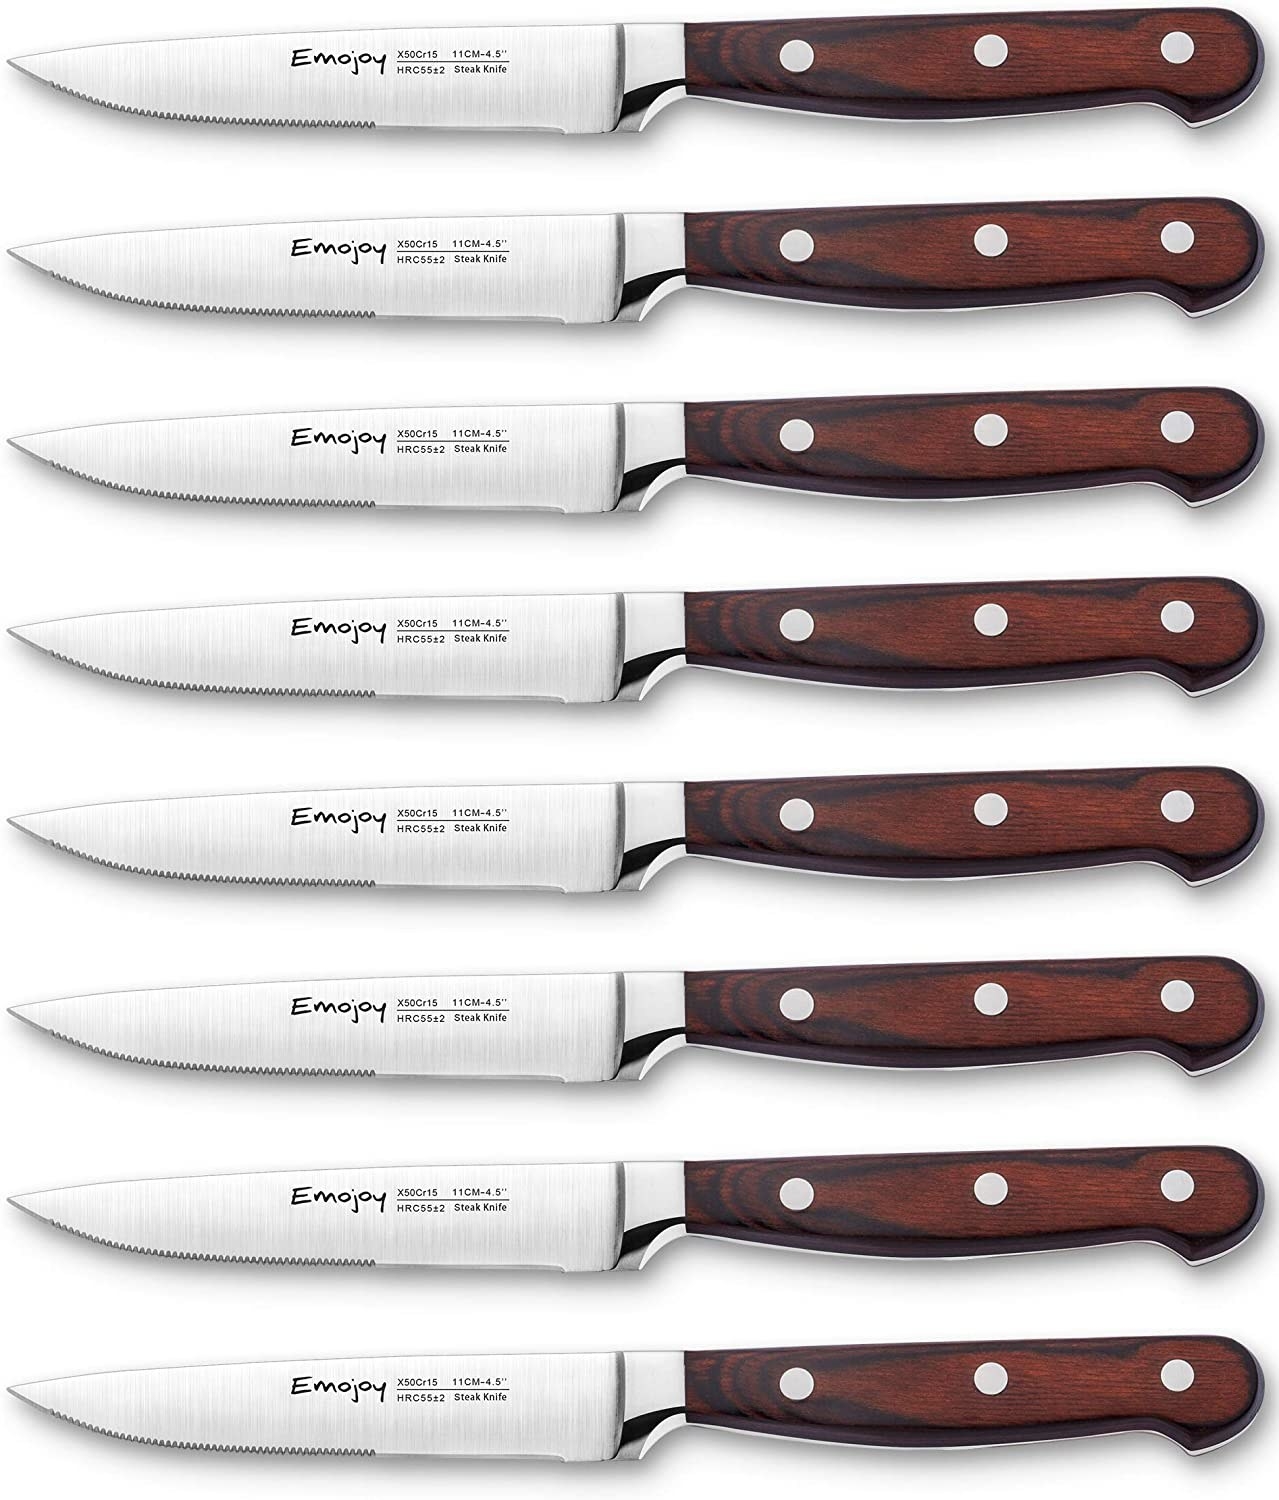 Eight steak knives with wooden handles with three metal circle accents on each